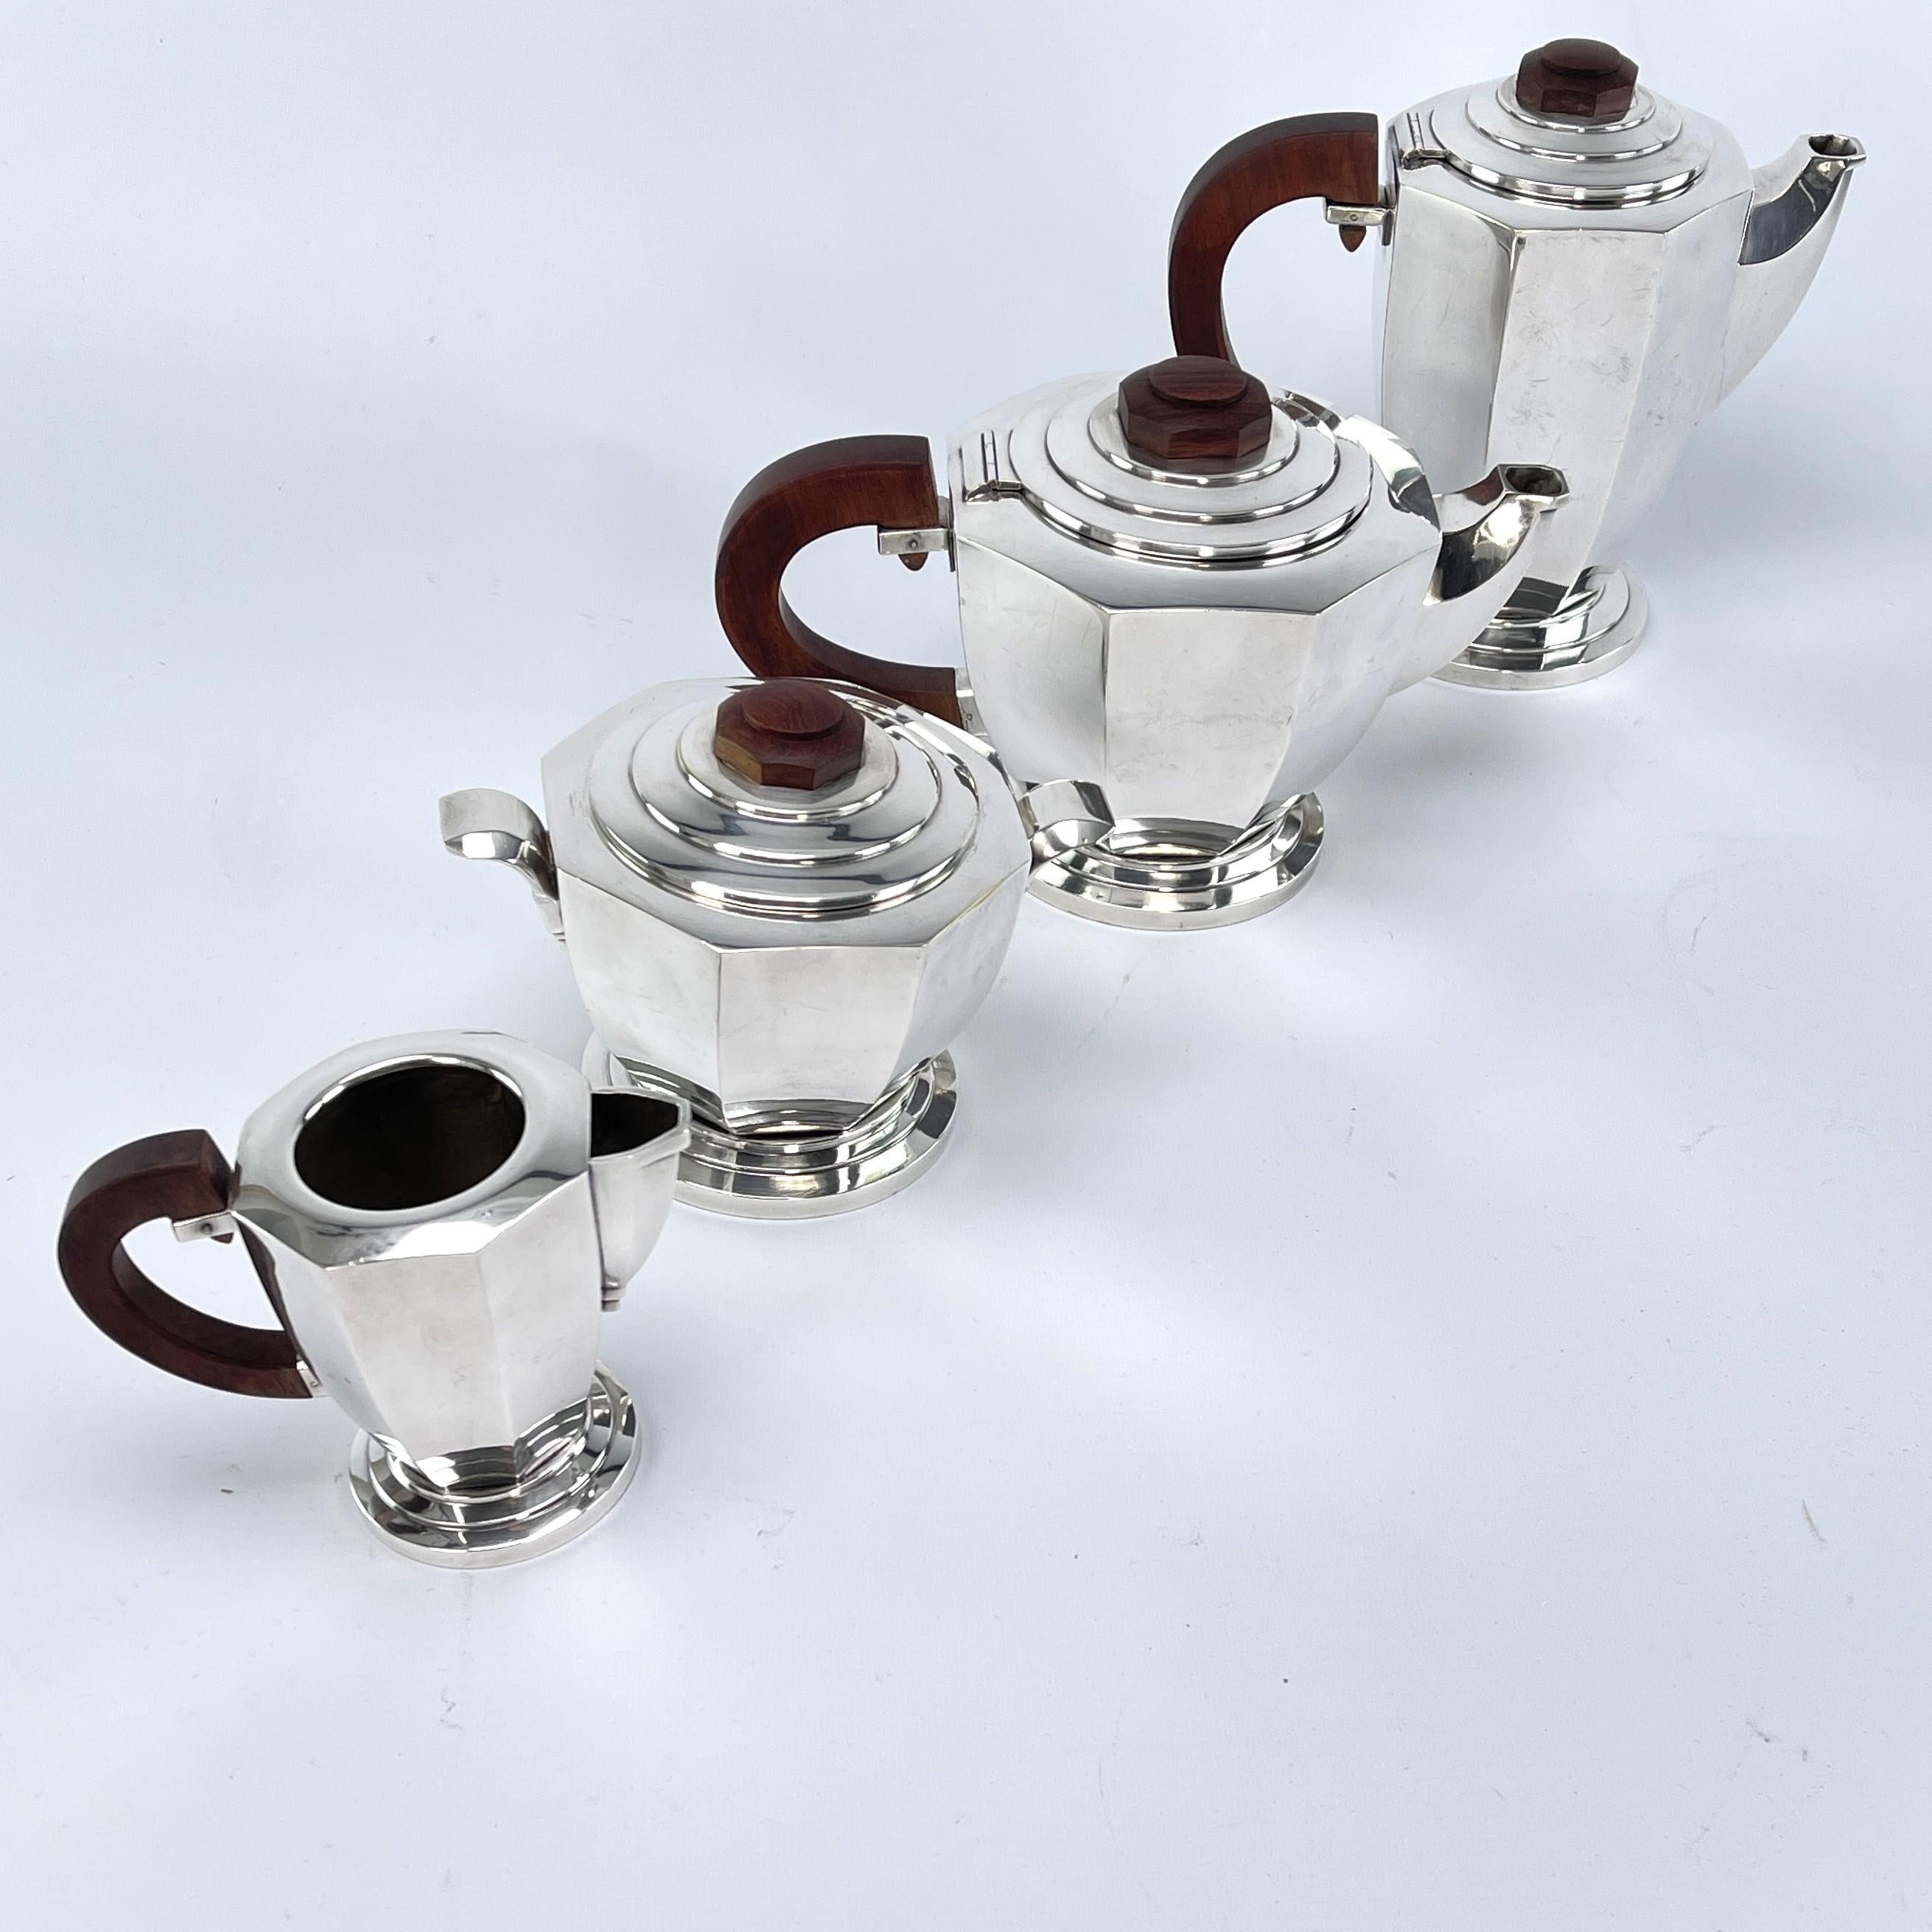 Coffee/tea set - 1920s

This coffee set from the 1920s is in the typical style of the streamline modern. It includes a coffee pot, teapot, sugar bowl and a creamer.

Coffee pot
Height: ca. 20 cm / 7.87 in
Width: ca. 22 cm / 8.66 in
Depth: ca. 11 cm/